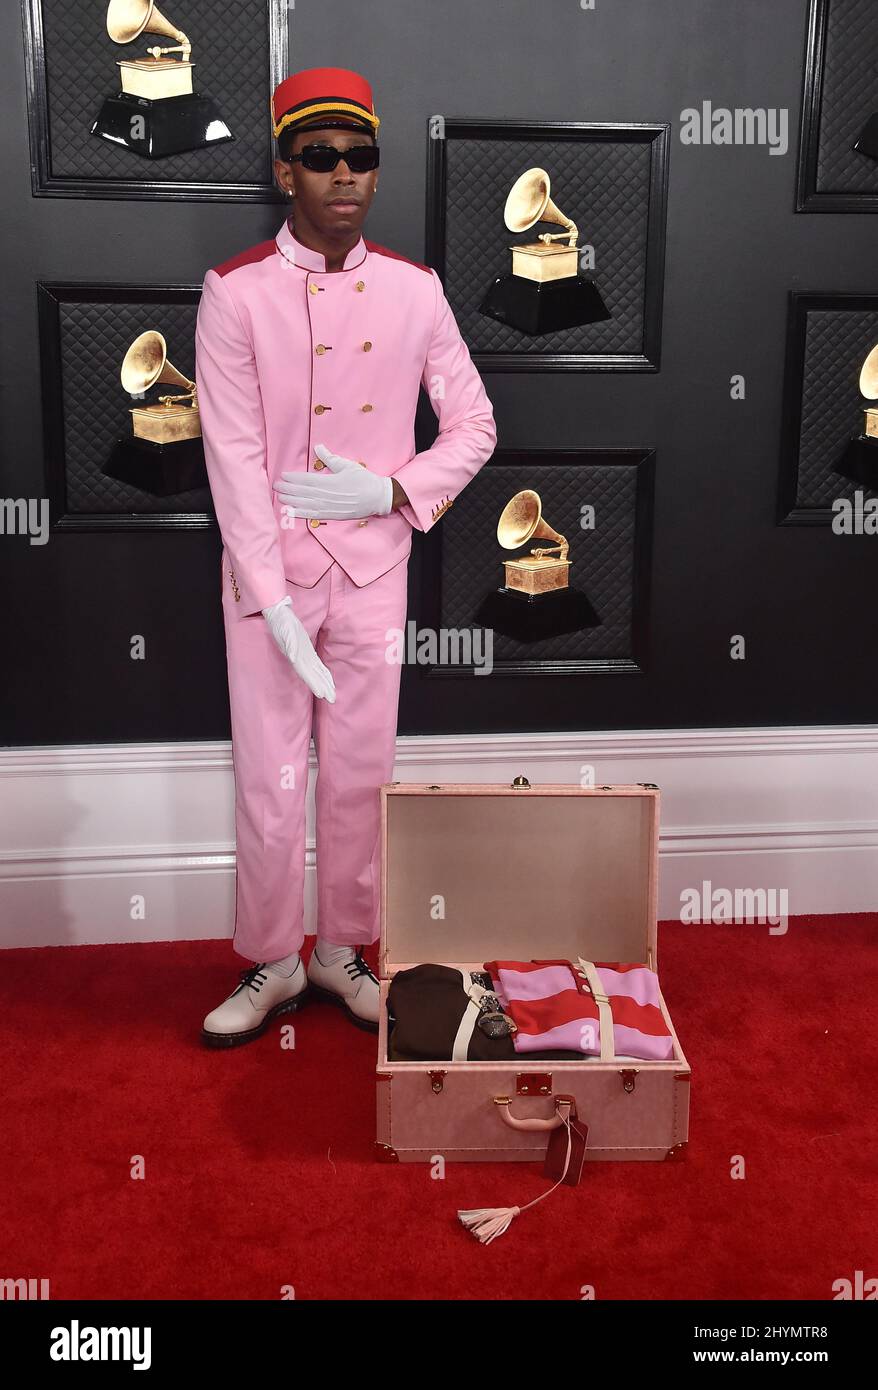 Tyler, the Creator Becomes Tyler, the Bellhop at the 2020 Grammys